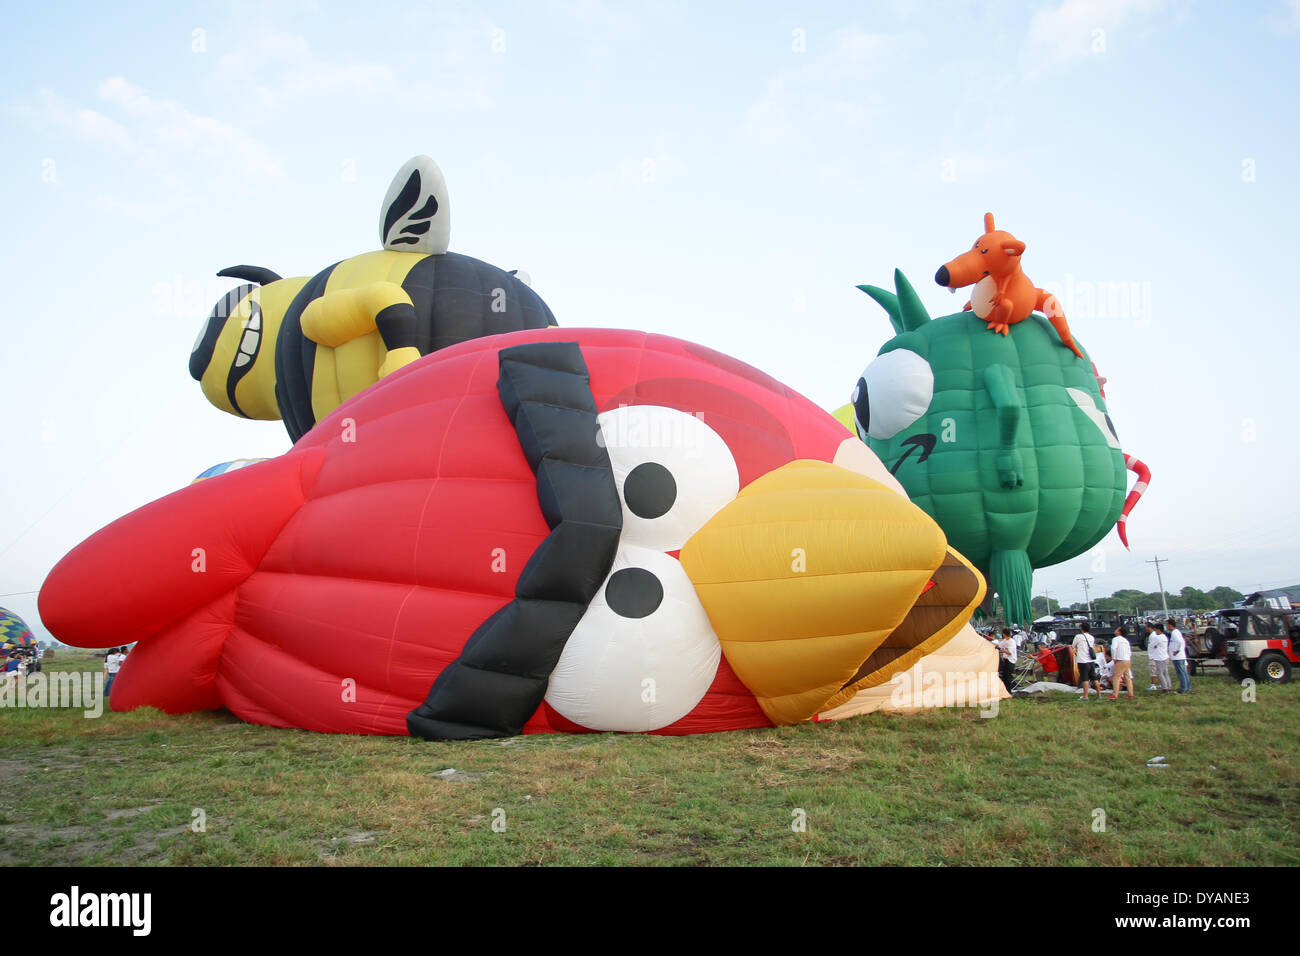 Lubao, Pampanga, Philippines. 11th Apr, 2014. Hot air balloons are inflated as it gets ready for take-off at the Philippine International Hot Air Balloon Festival on April 11, 2014. The Philippine International Hot Air Ballon Festival featured 21 countries with 37 balloons. Credit:  Mark Cristino/NurPhoto/ZUMAPRESS.com/Alamy Live News Stock Photo